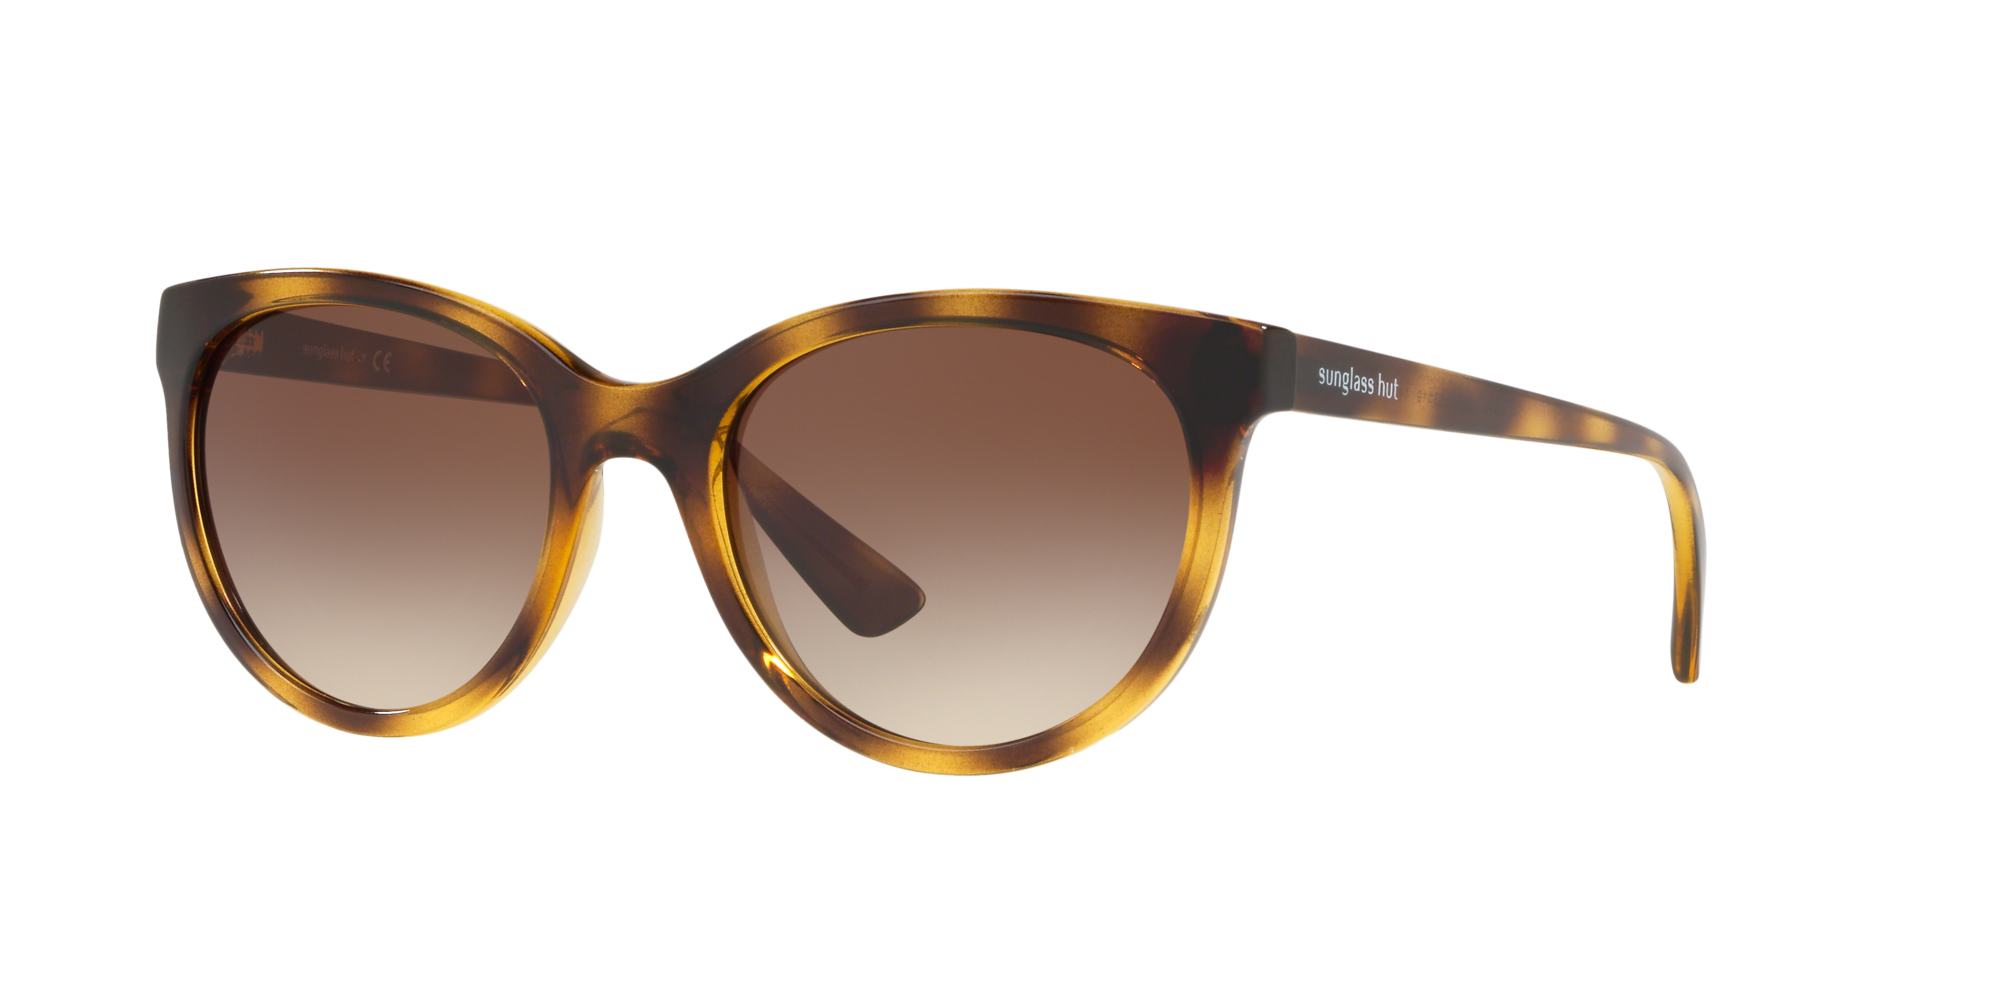 Sunglass Hut - Tip 4: “Sporty sunglasses are my go-to accessory for a  daring look.” Take a cue from @chiaraferragni and rock this head-turning  @oakley shield. #MySunglassHutSelection #HouseofSun www.sunglasshut .com/chiara-ferragni-sunglasses-tips ...